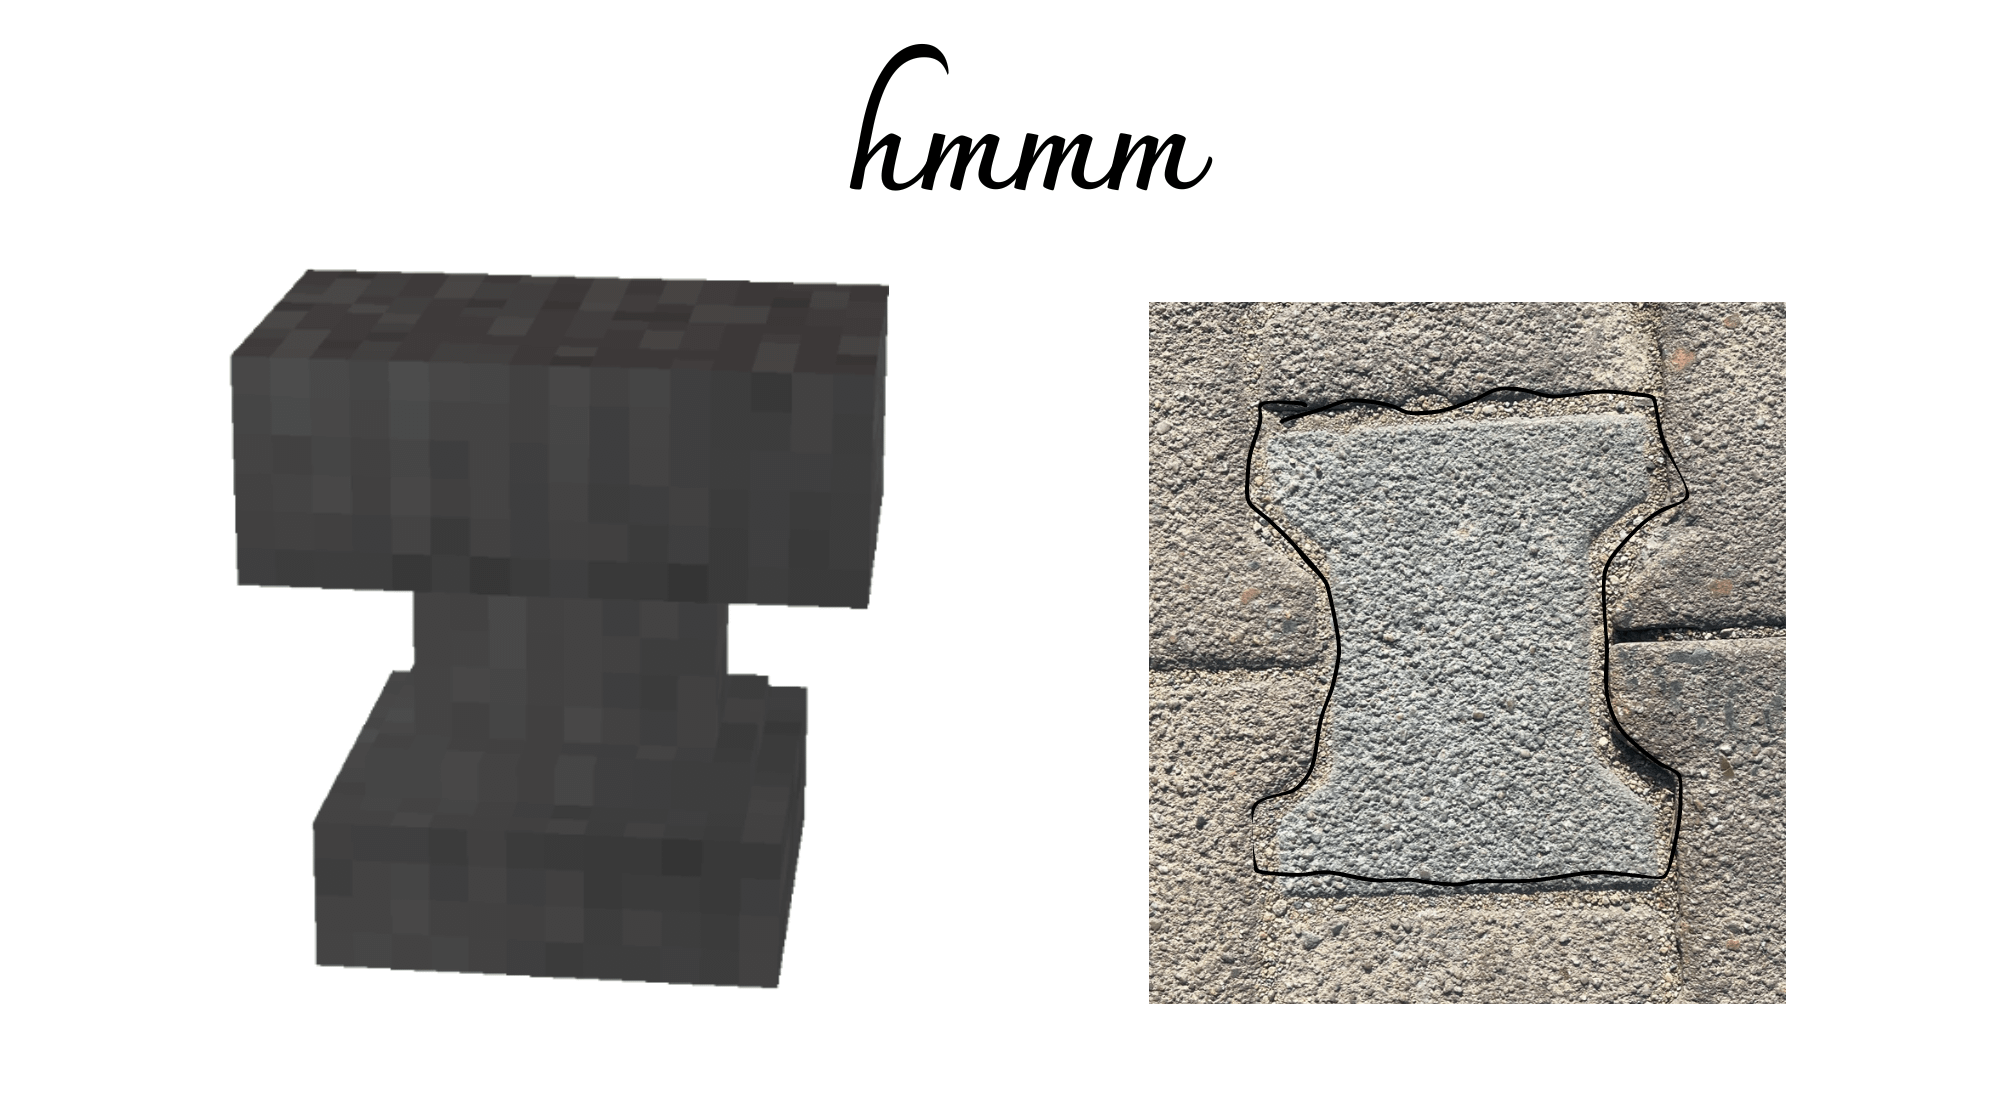 Minecraft Memes - "Anvil, the ultimate weapon"